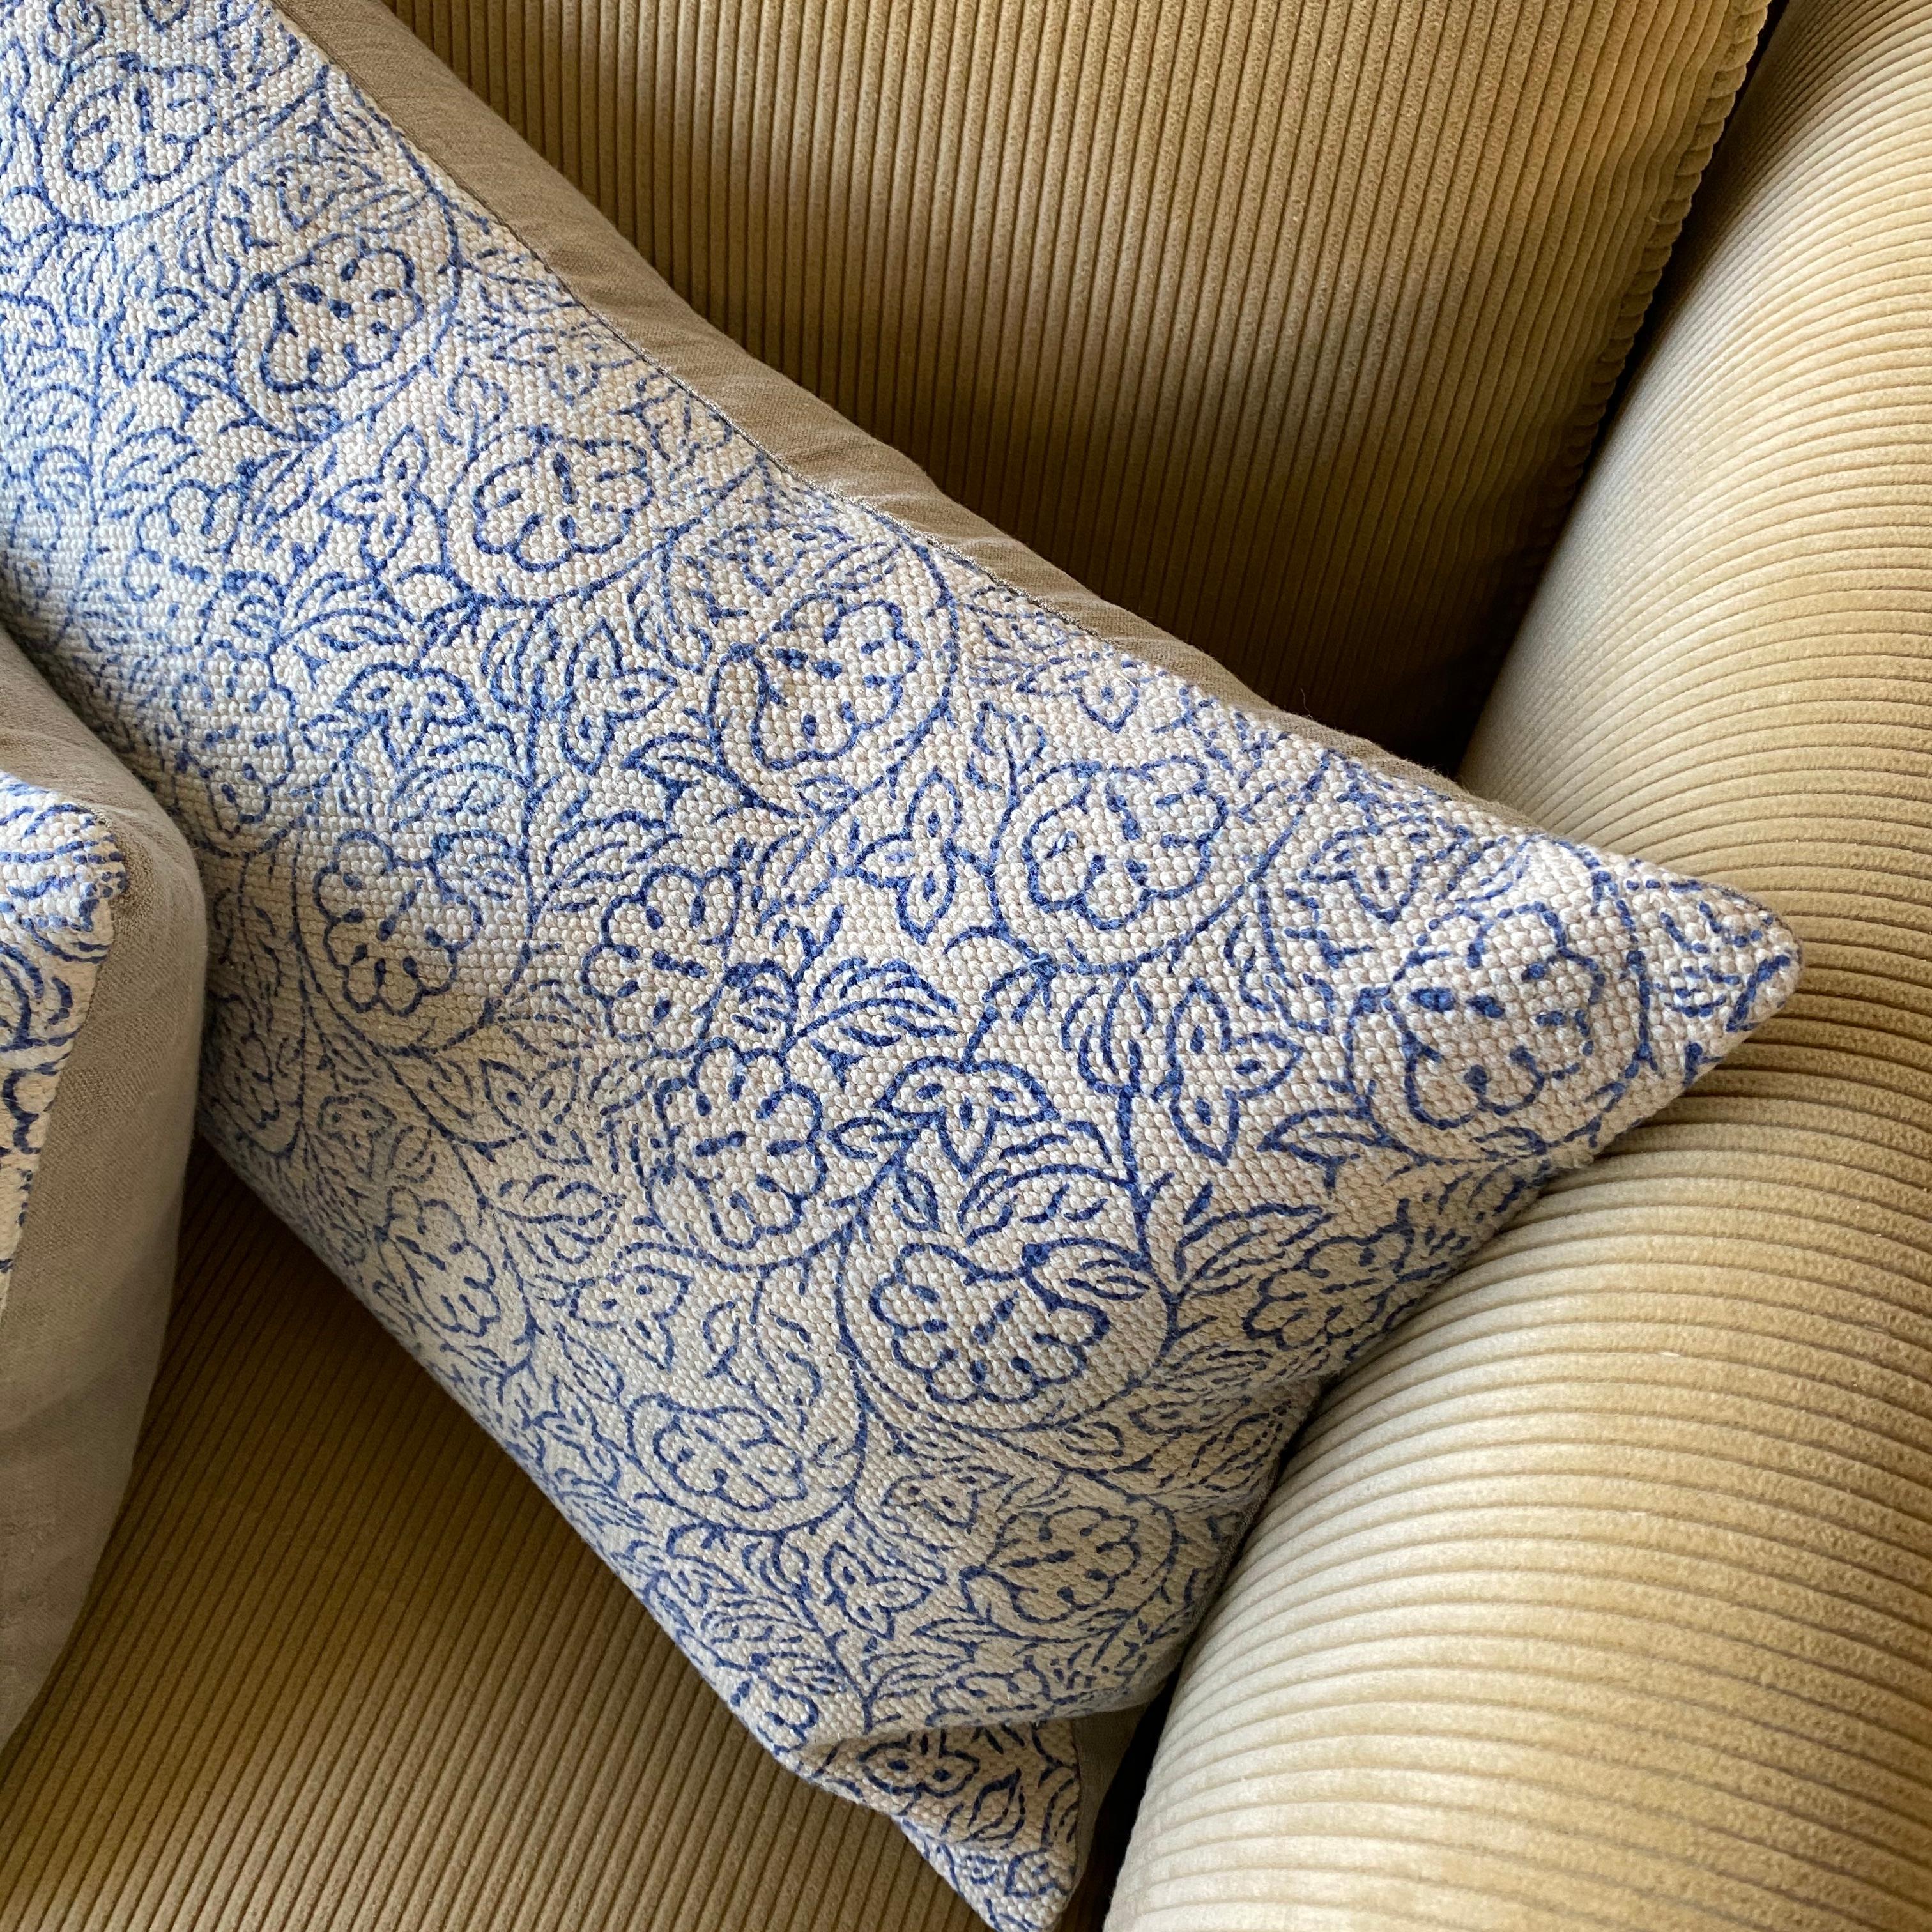 Contemporary Heavy Cream and Blue Floral Linen Pillow